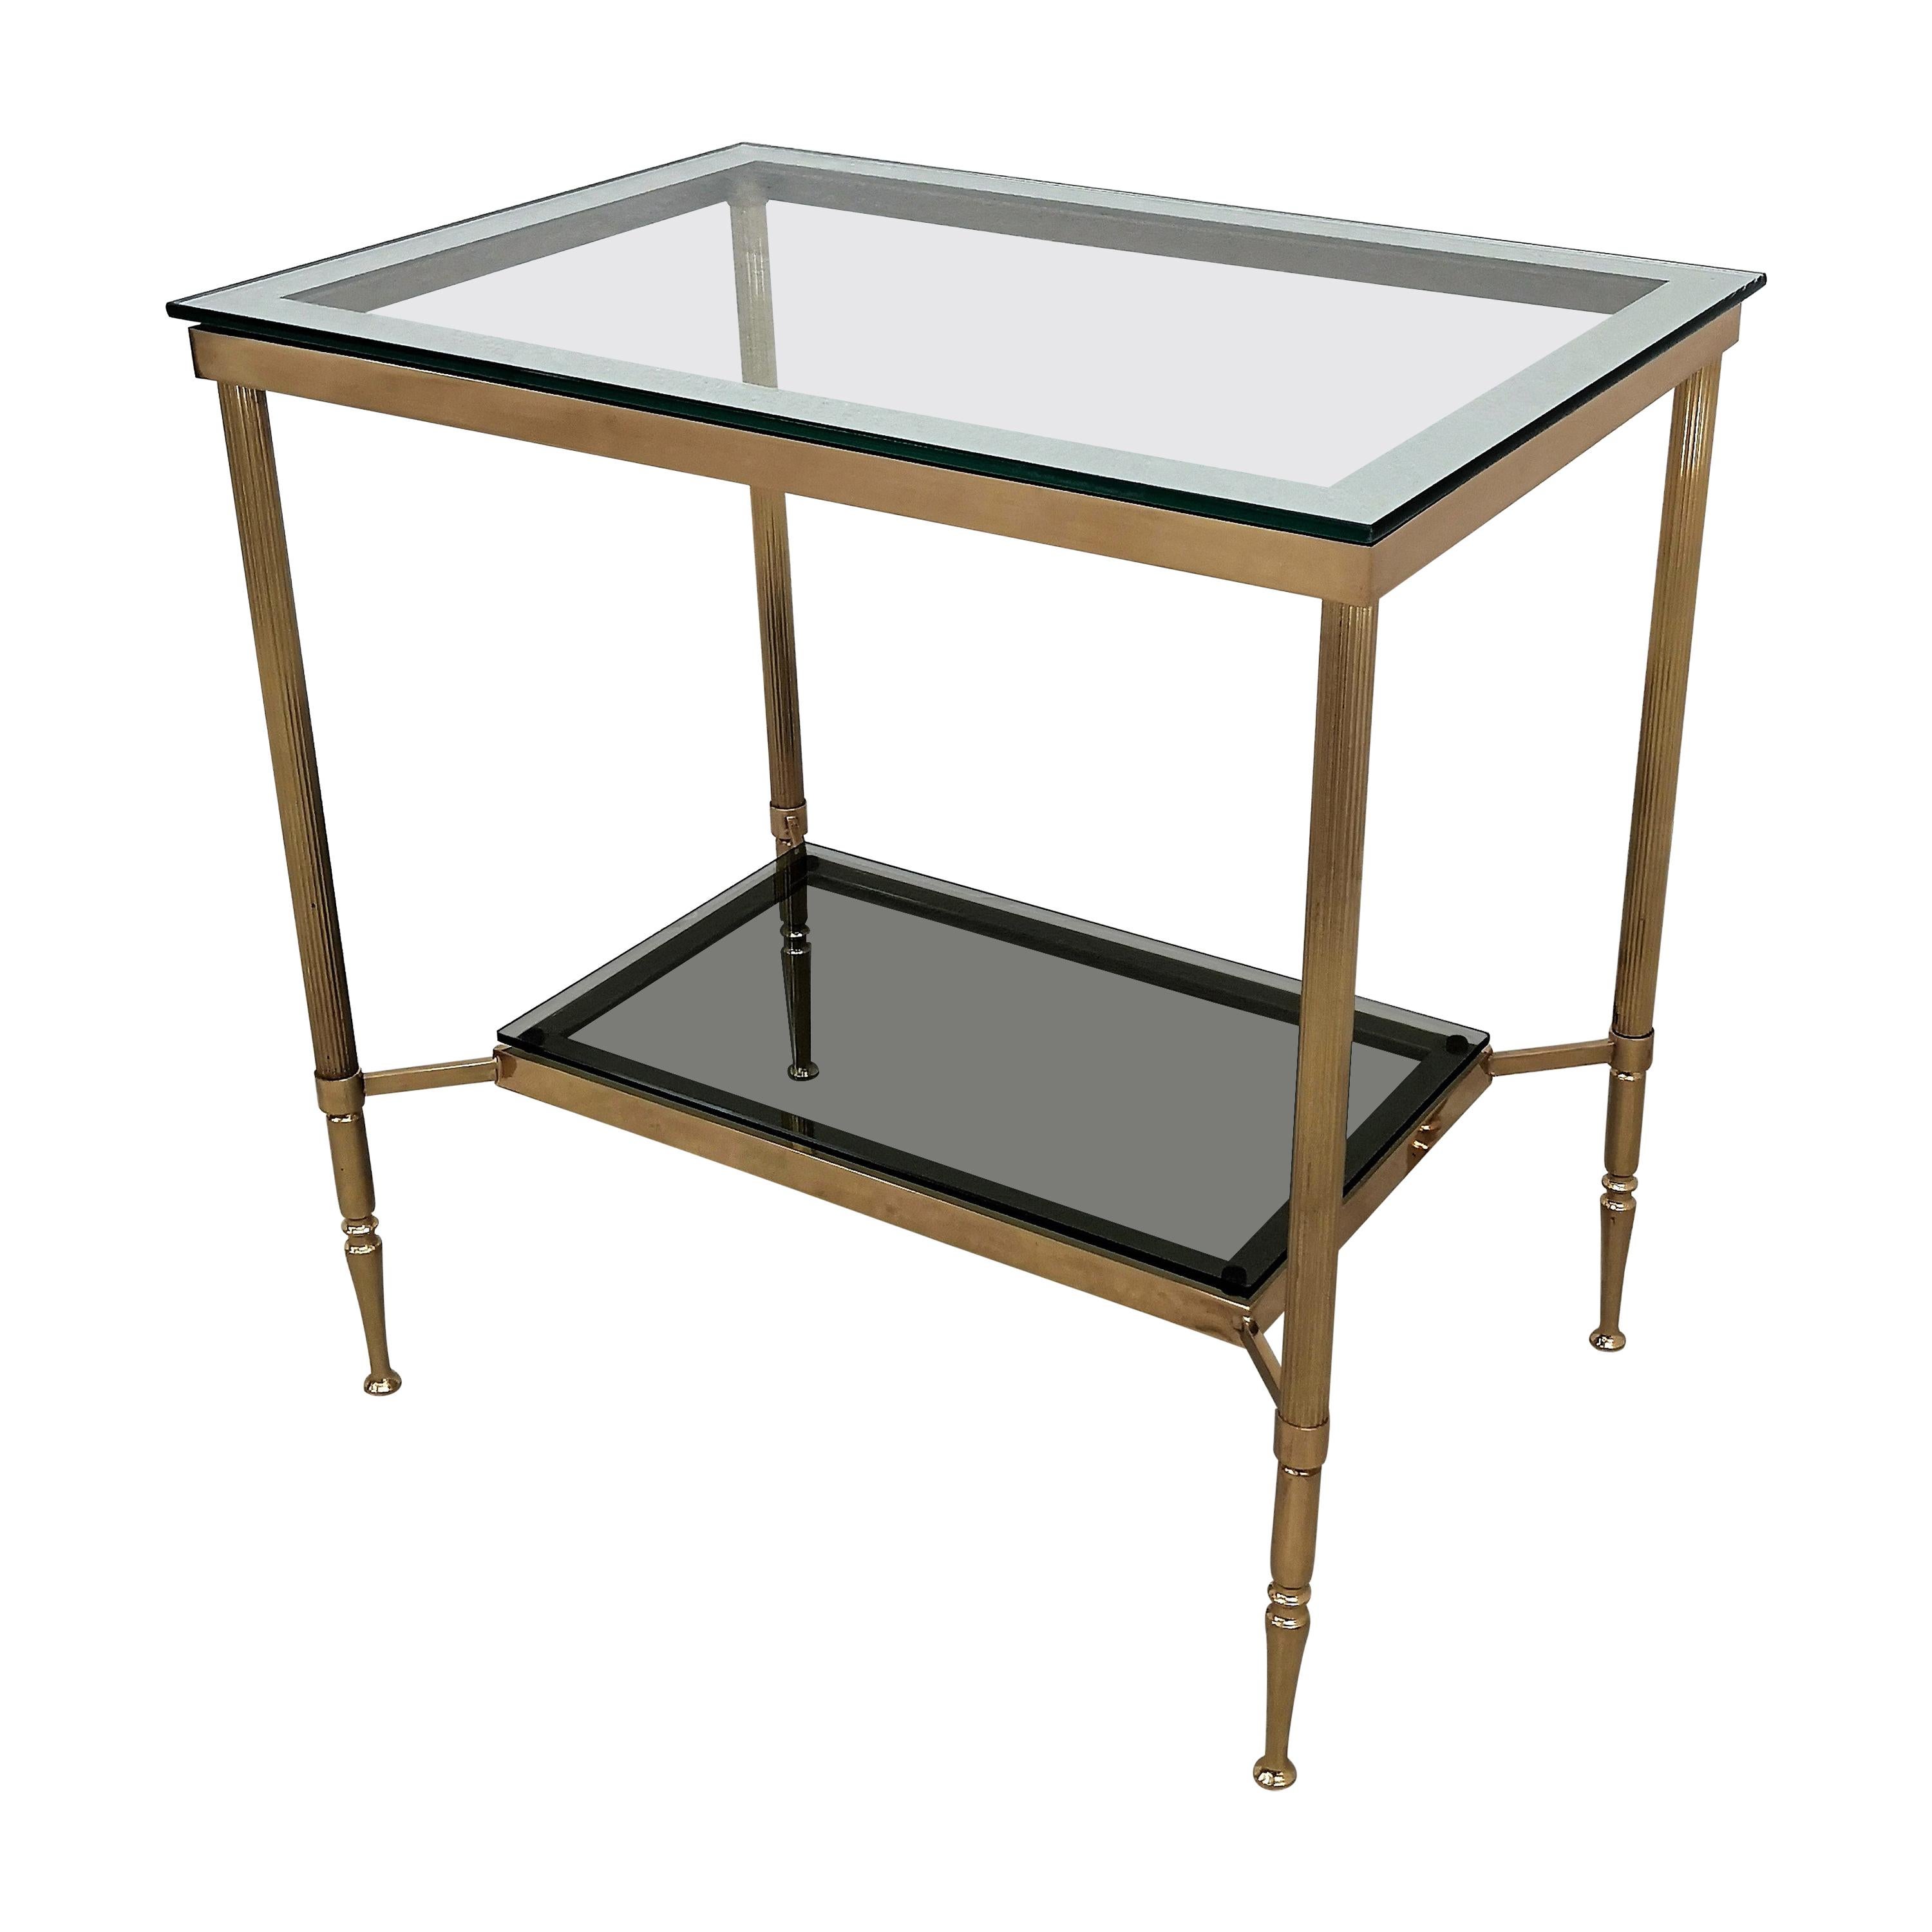 1980s Italian Modern Regency Neoclassical Brass and Mirror Glass Two-Tier Table